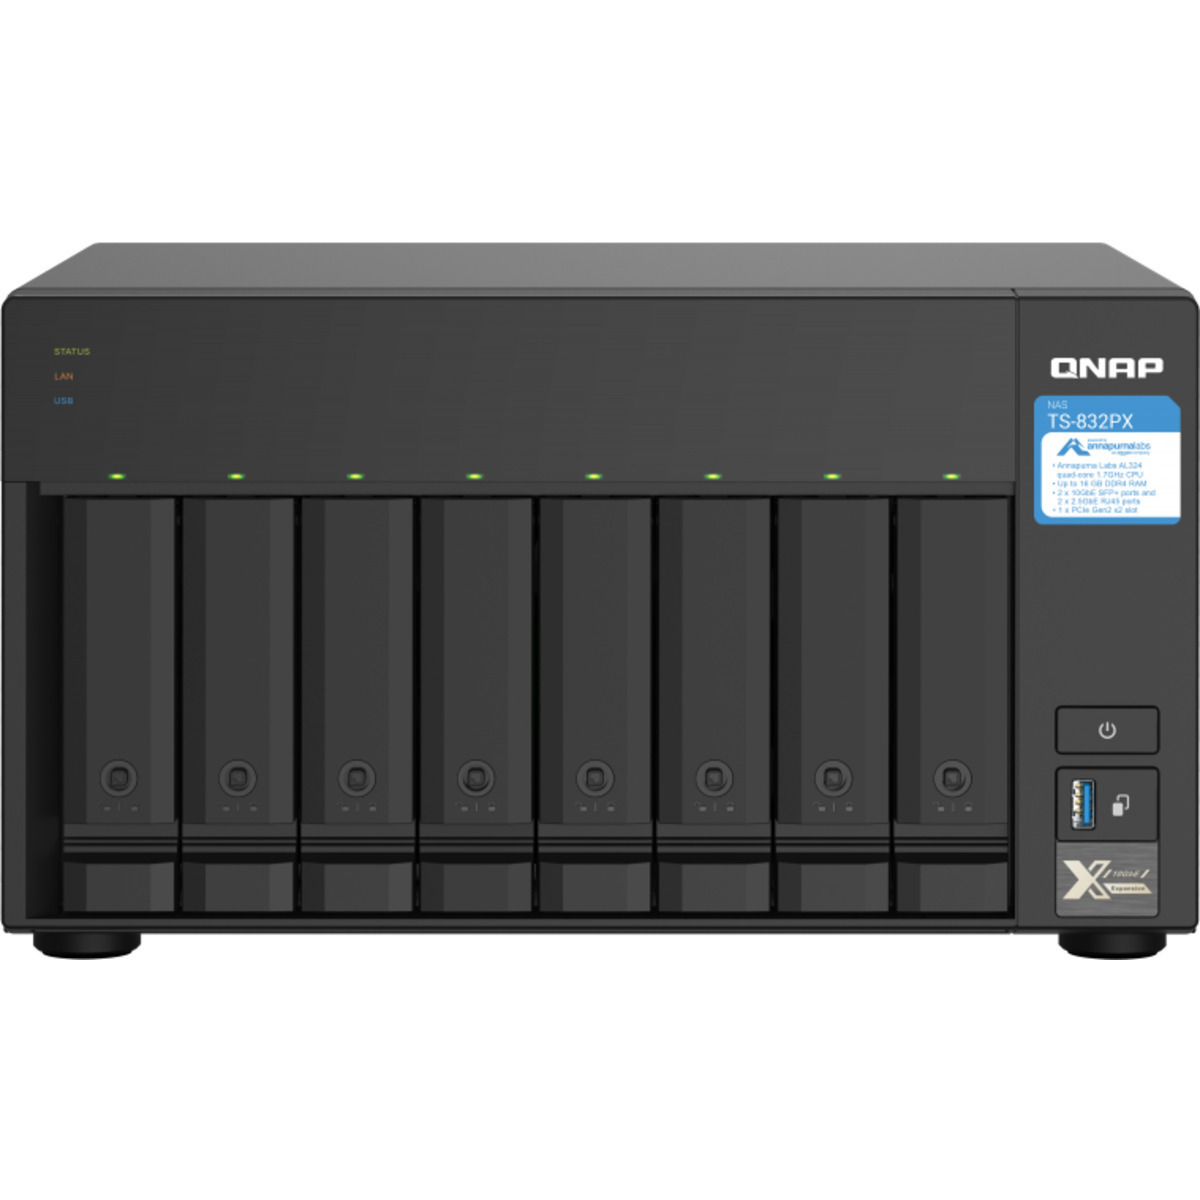 QNAP TS-832PX 80tb 8-Bay Desktop Multimedia / Power User / Business NAS - Network Attached Storage Device 4x20tb Seagate EXOS X20 ST20000NM007D 3.5 7200rpm SATA 6Gb/s HDD ENTERPRISE Class Drives Installed - Burn-In Tested - FREE RAM UPGRADE TS-832PX